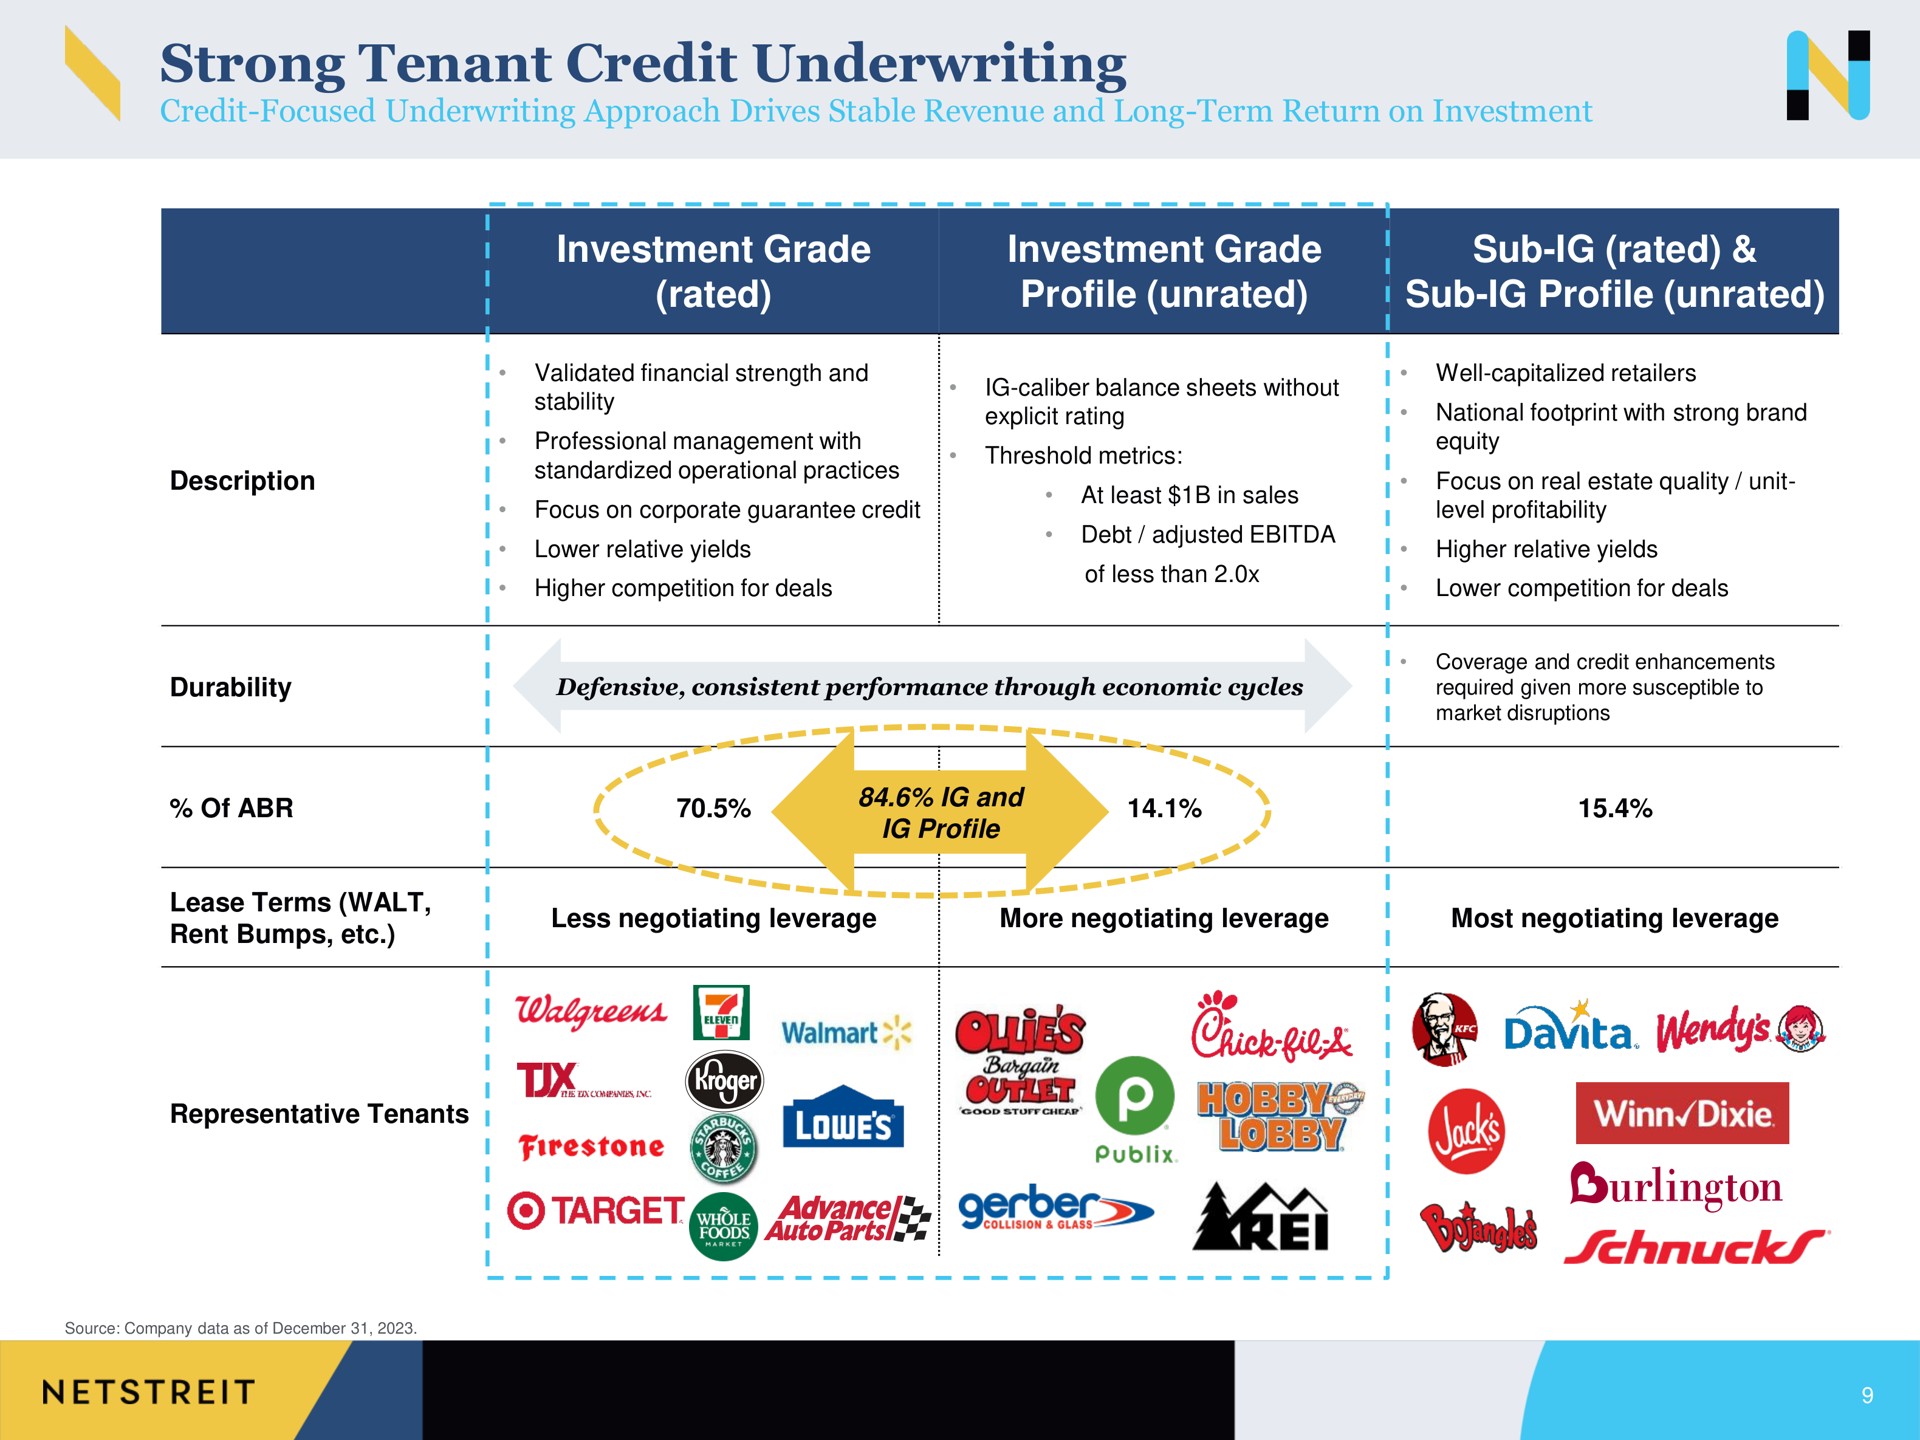 strong tenant credit underwriting investment grade rated investment grade profile unrated sub rated sub profile unrated of and hobbys owed atmos | Netstreit